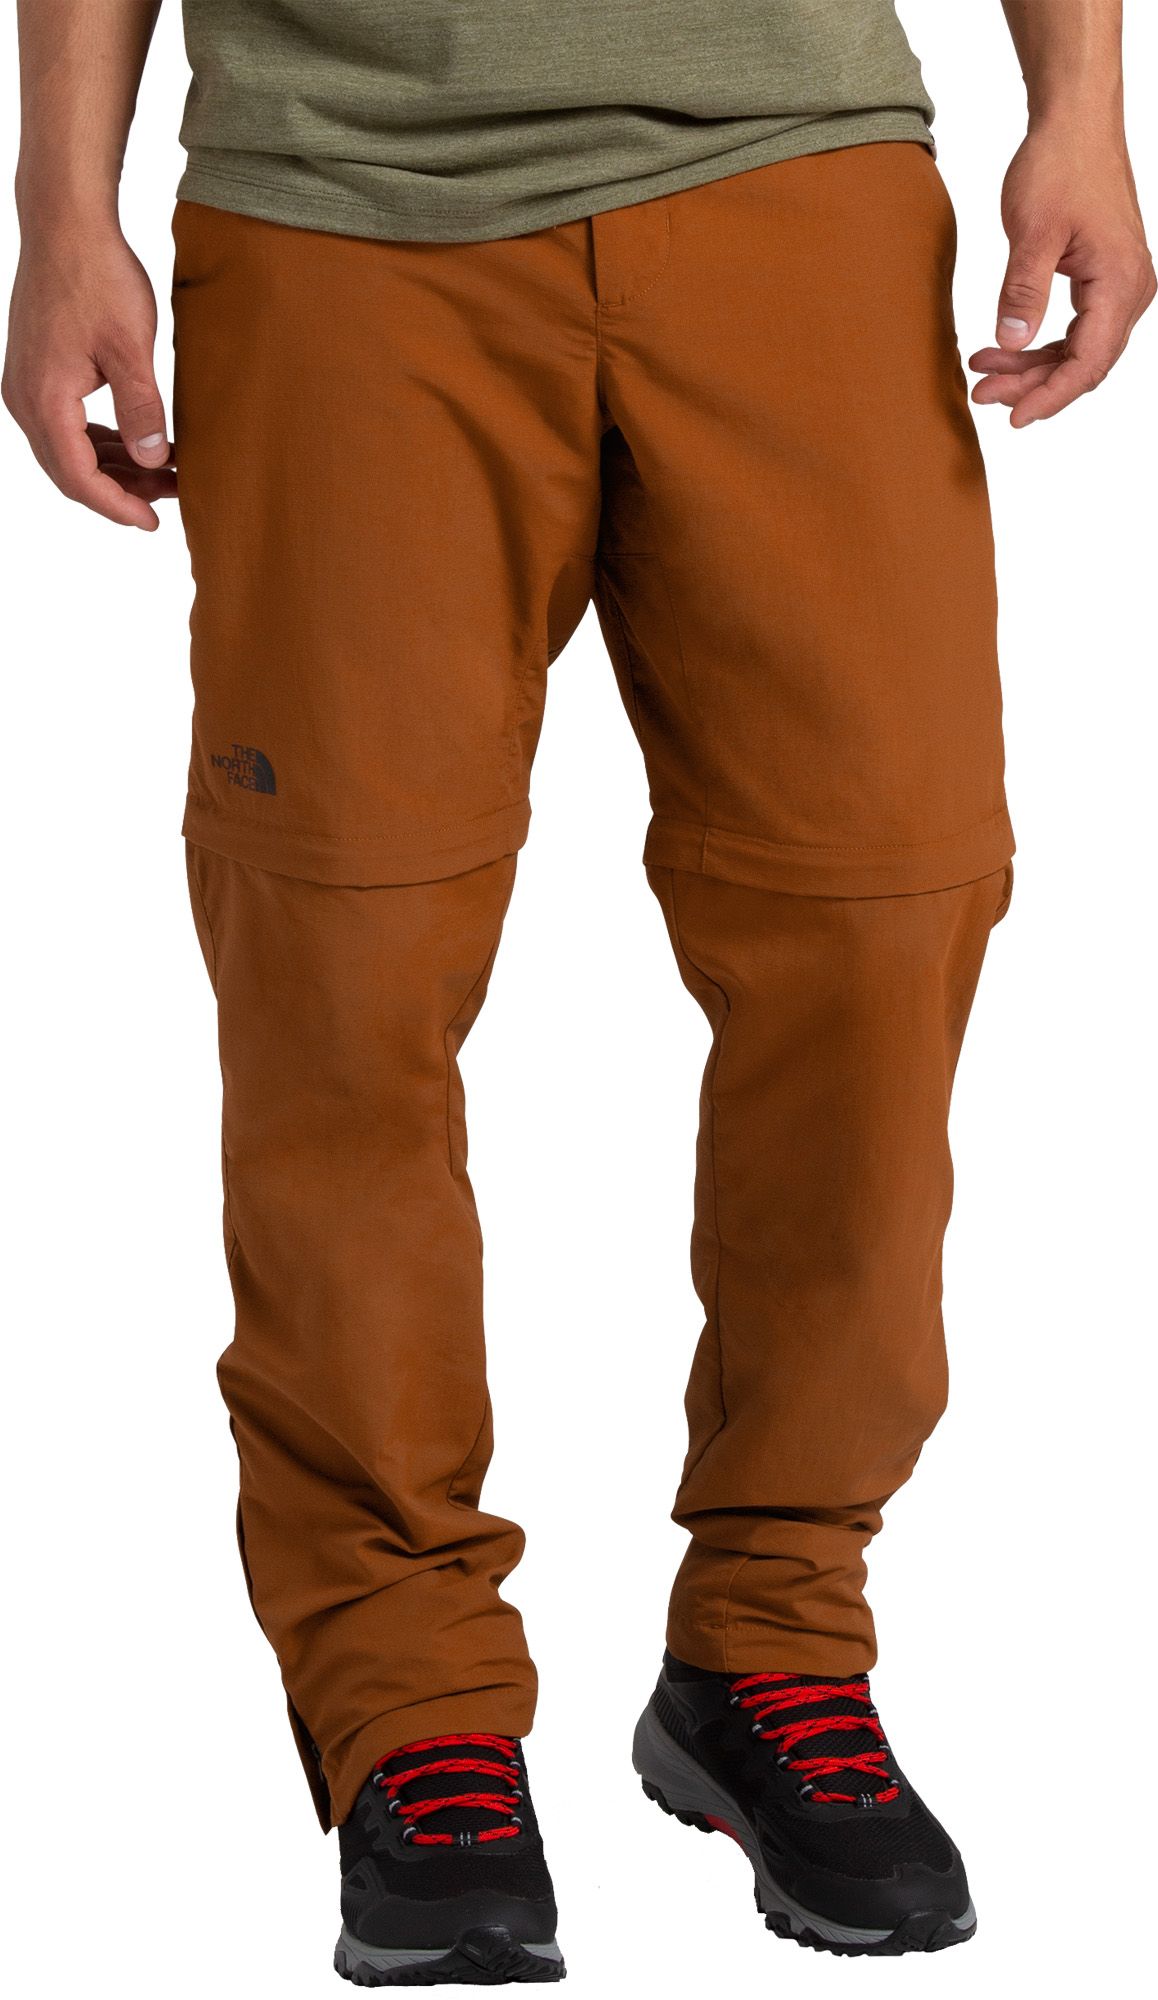 north face zip off trousers mens